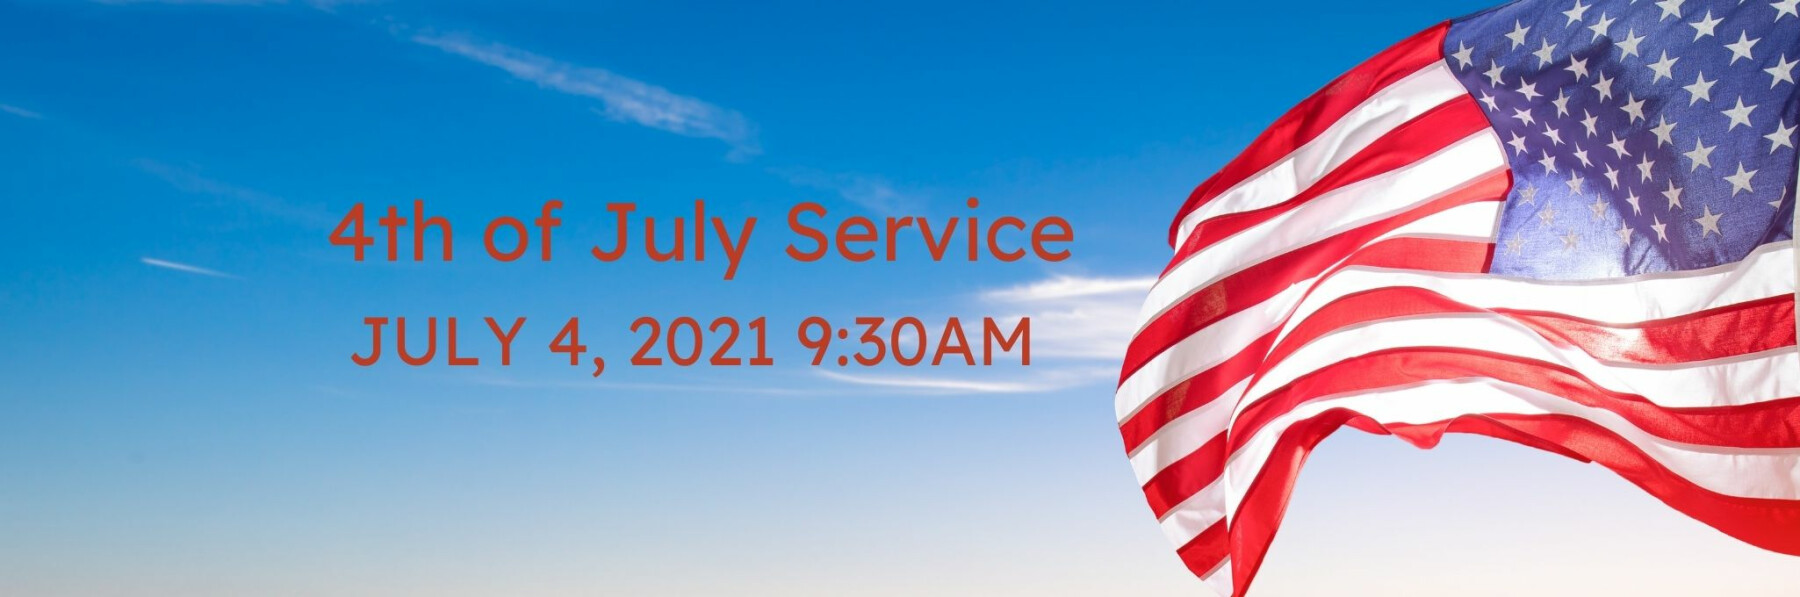 4th of July Service